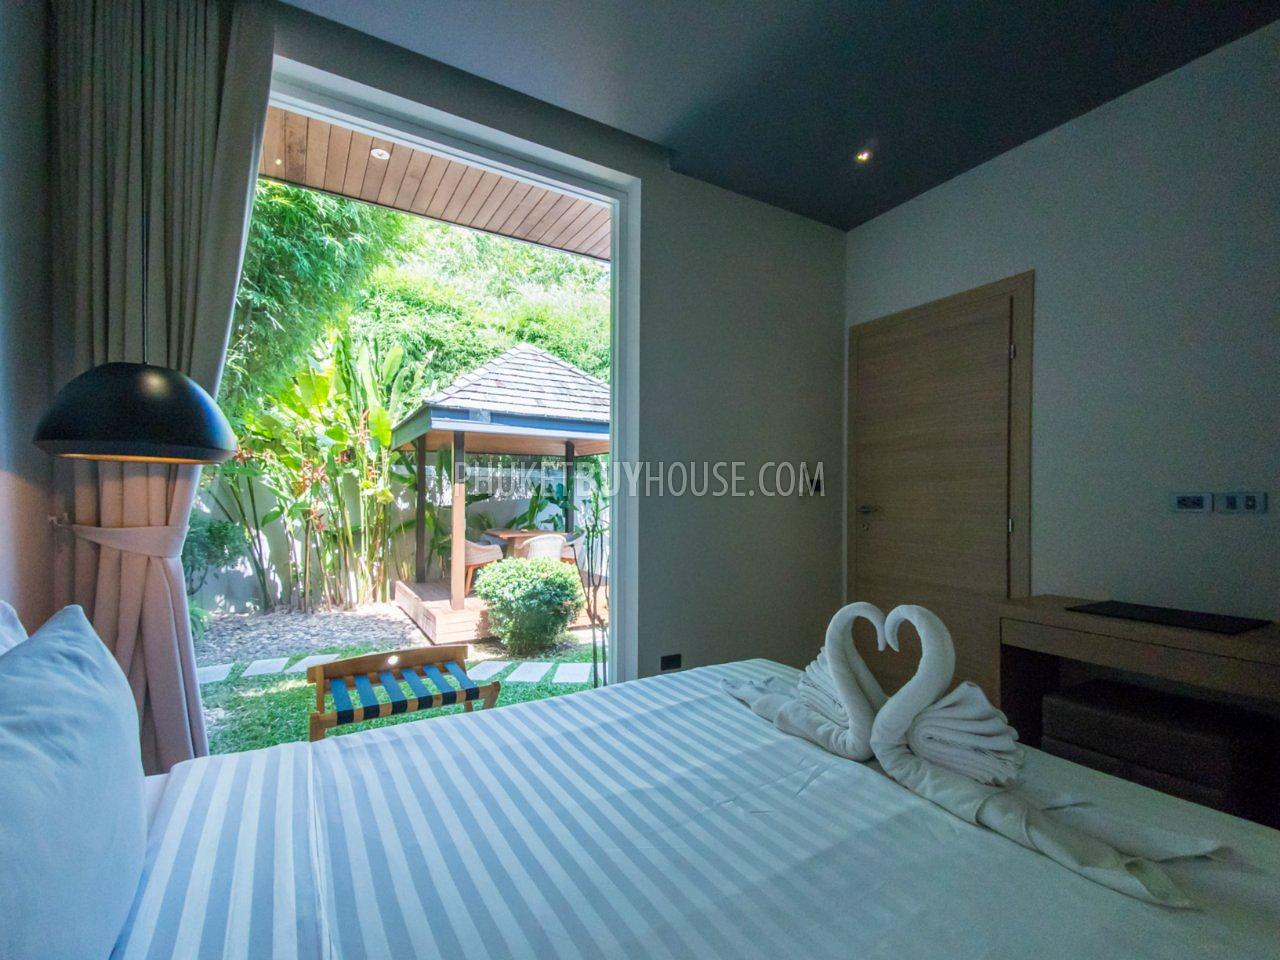 LAY4524: Tropical Modern Villa with 3 bedrooms in Layan. Photo #18